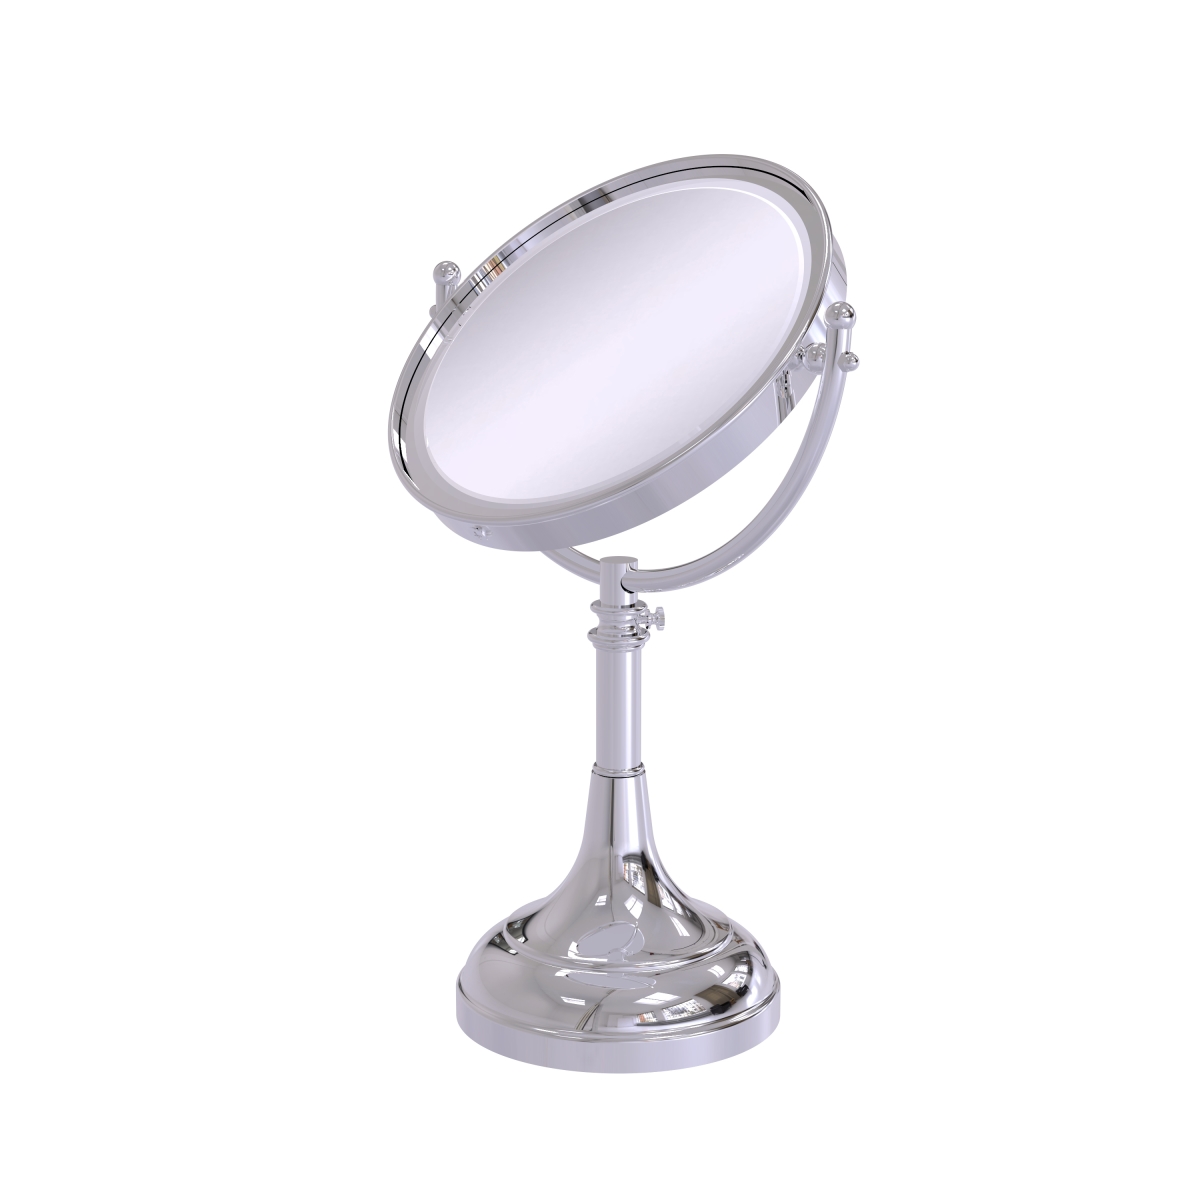 Picture of Allied Brass DM-1-4X-PC 8 in. Height Adjustable Vanity Top Make-Up Mirror 4X Magnification, Polished Chrome